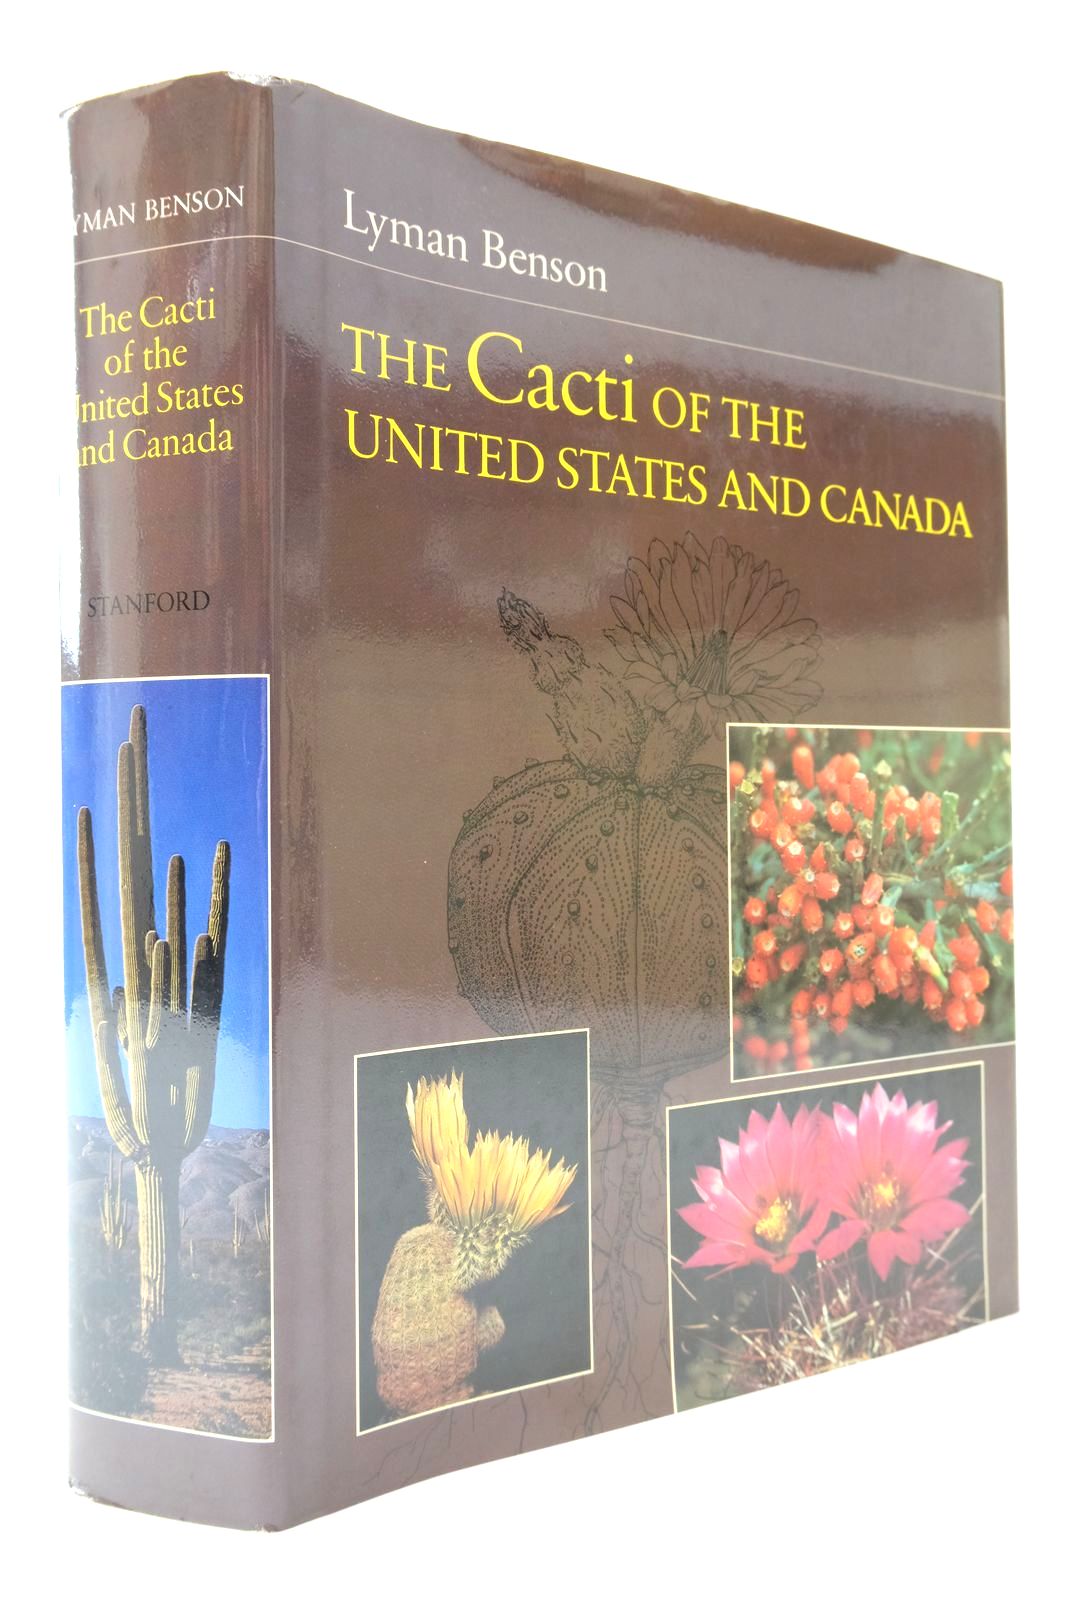 The Cacti of The United States and Canada